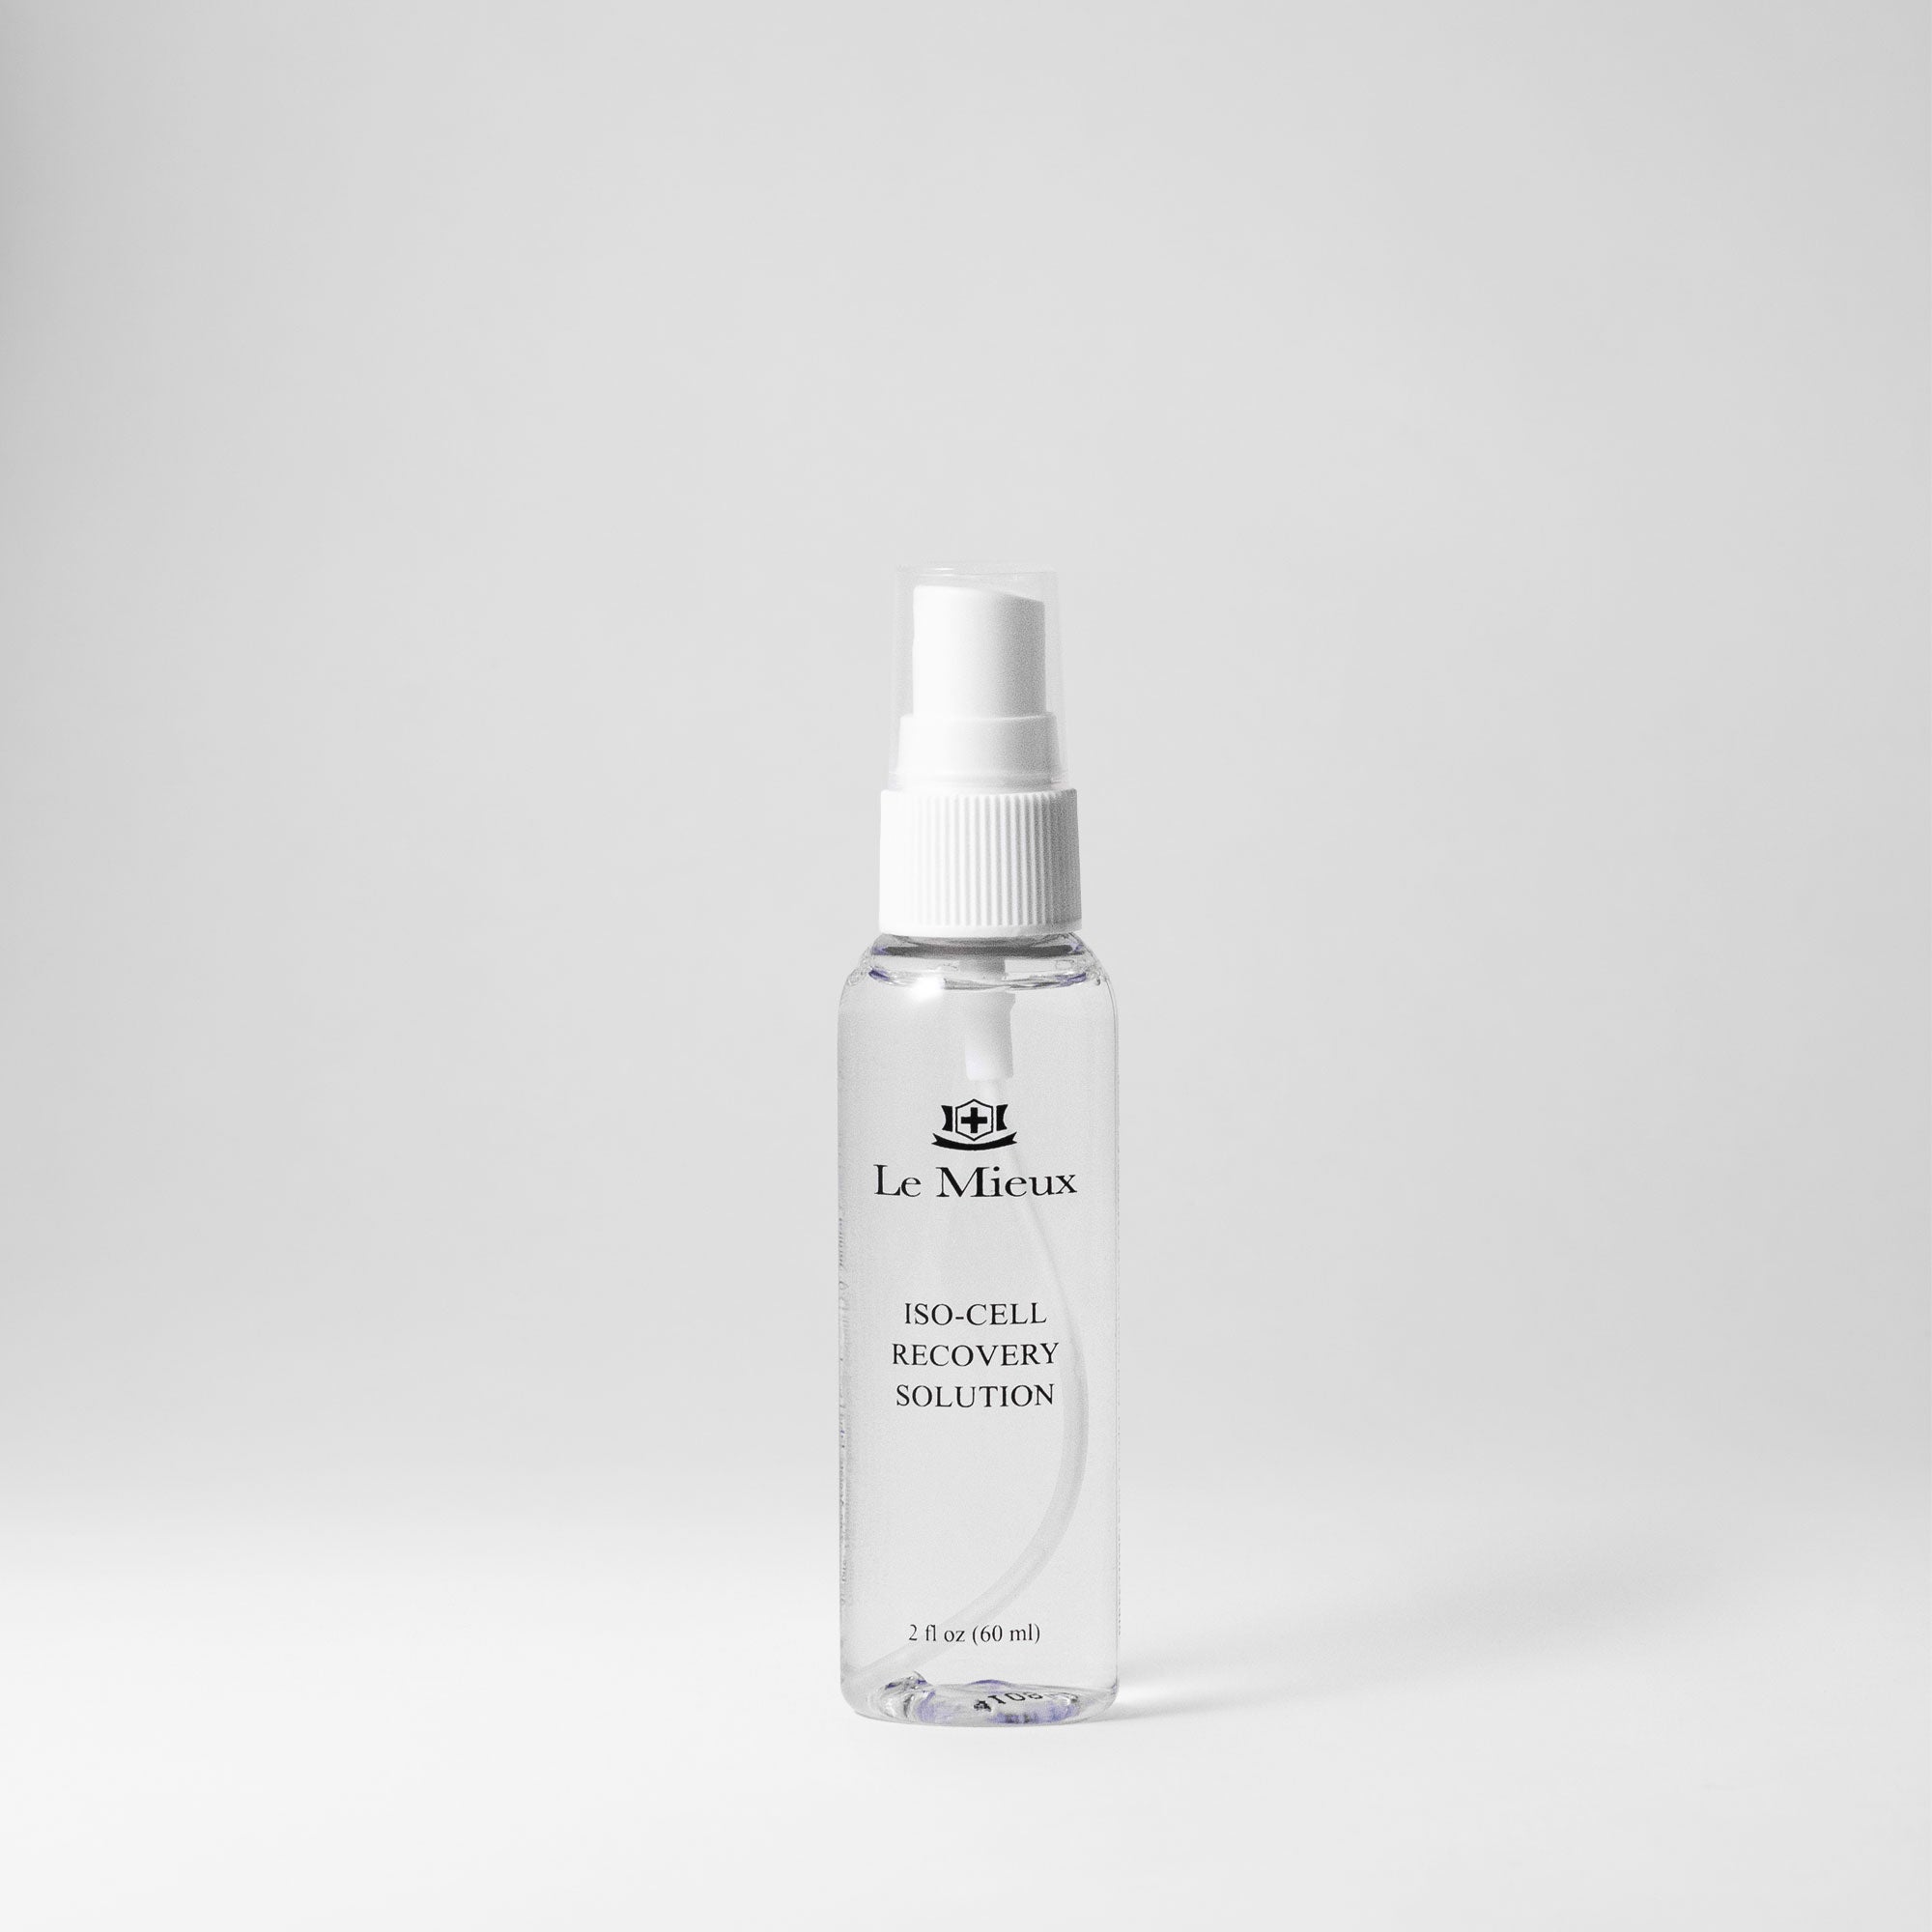  ISO-CELL RECOVERY SOLUTION from Le Mieux Skincare - 3